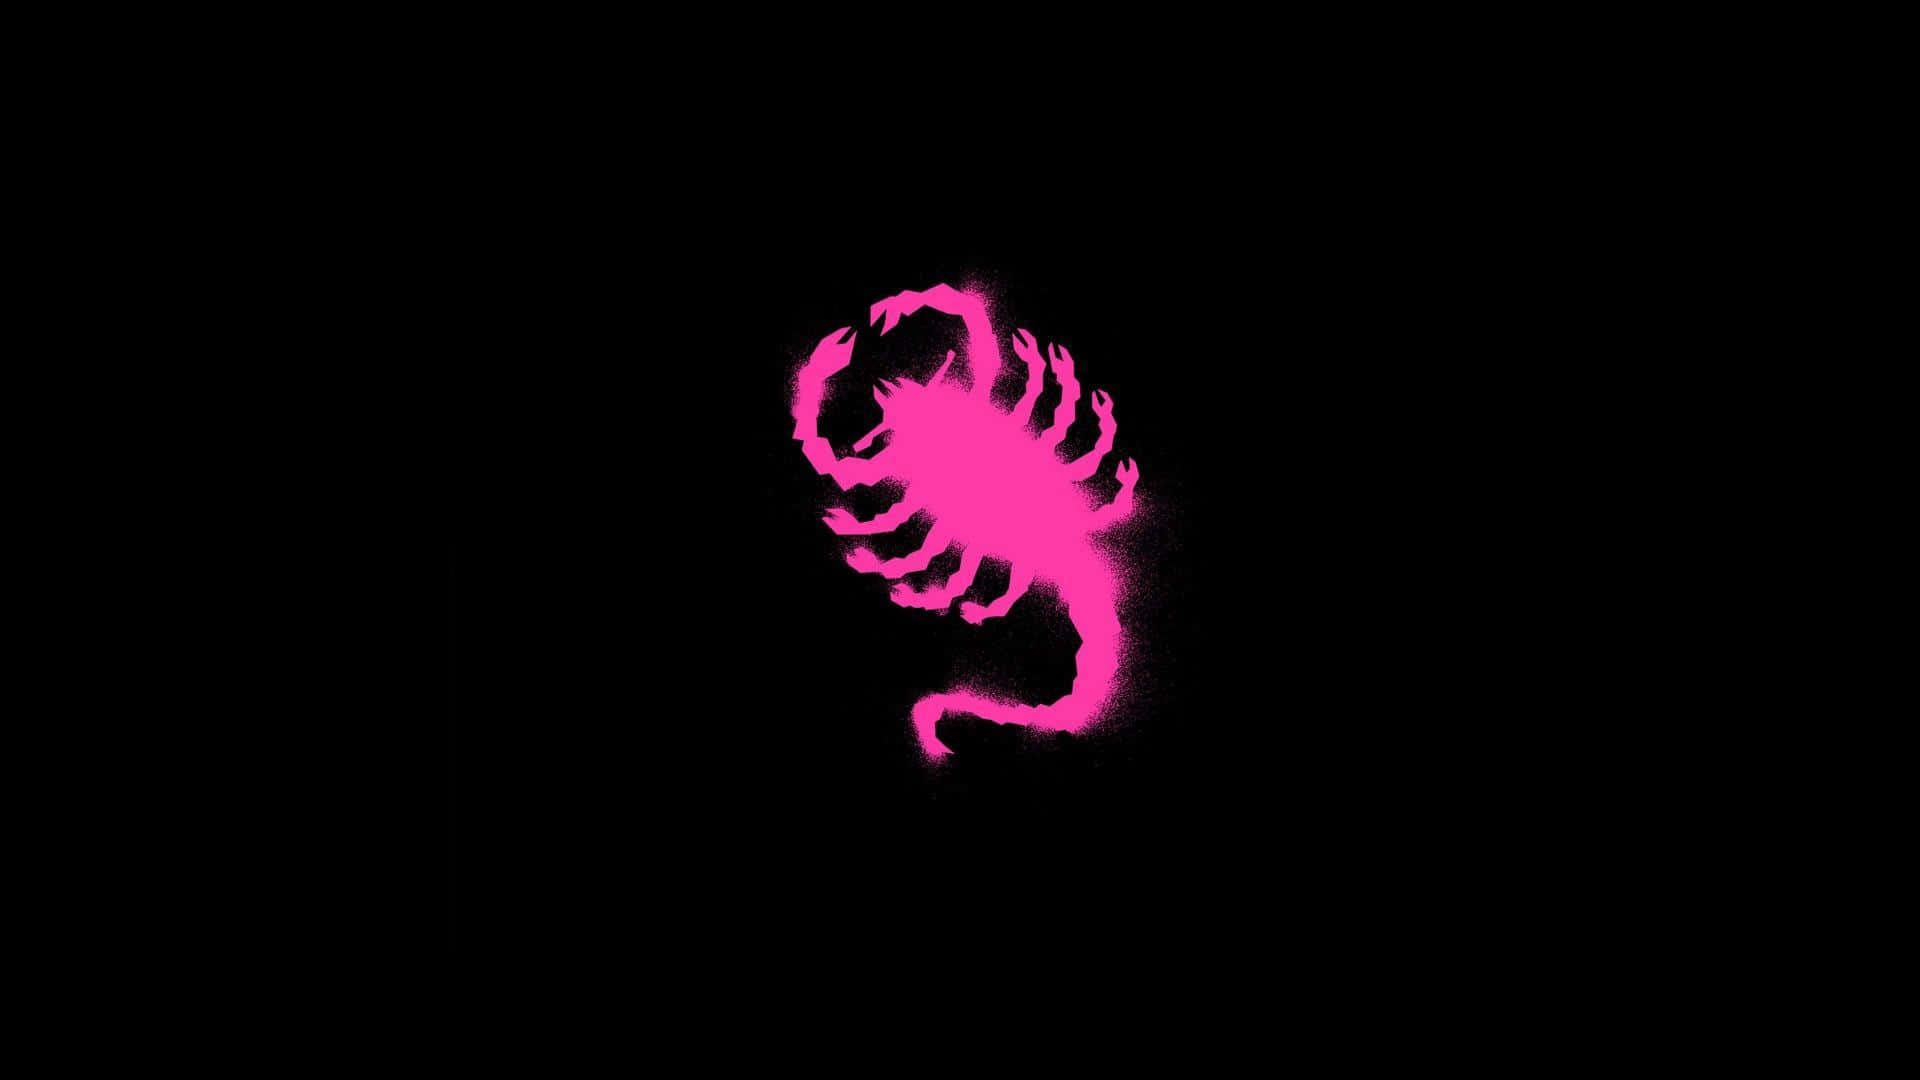 A Pink Scorpion On A Black Background